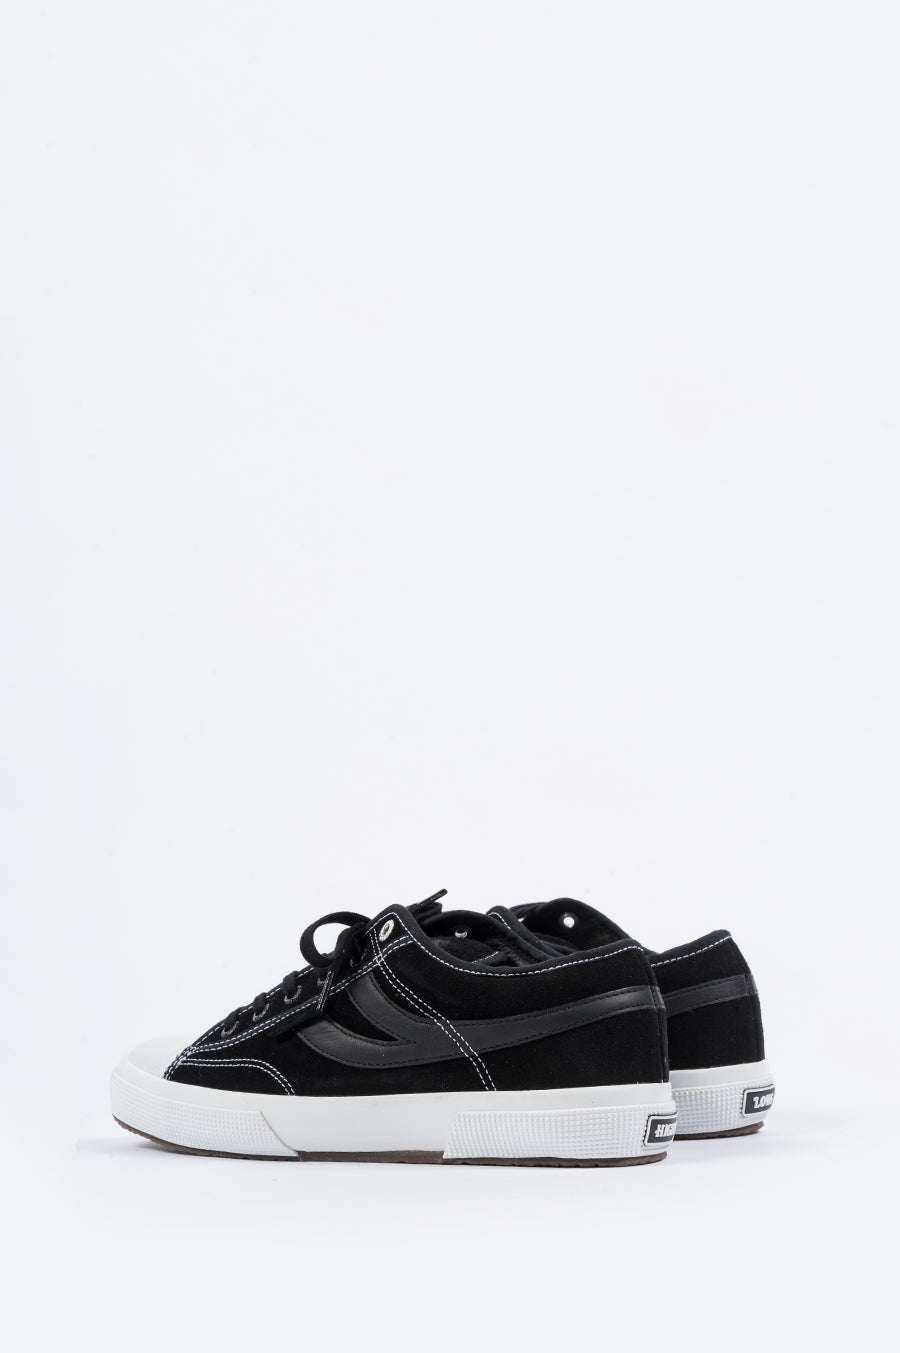 FUTUR X HIGHS AND LOWS X SUPERGA FHS PRO LOW BLACK - BLENDS